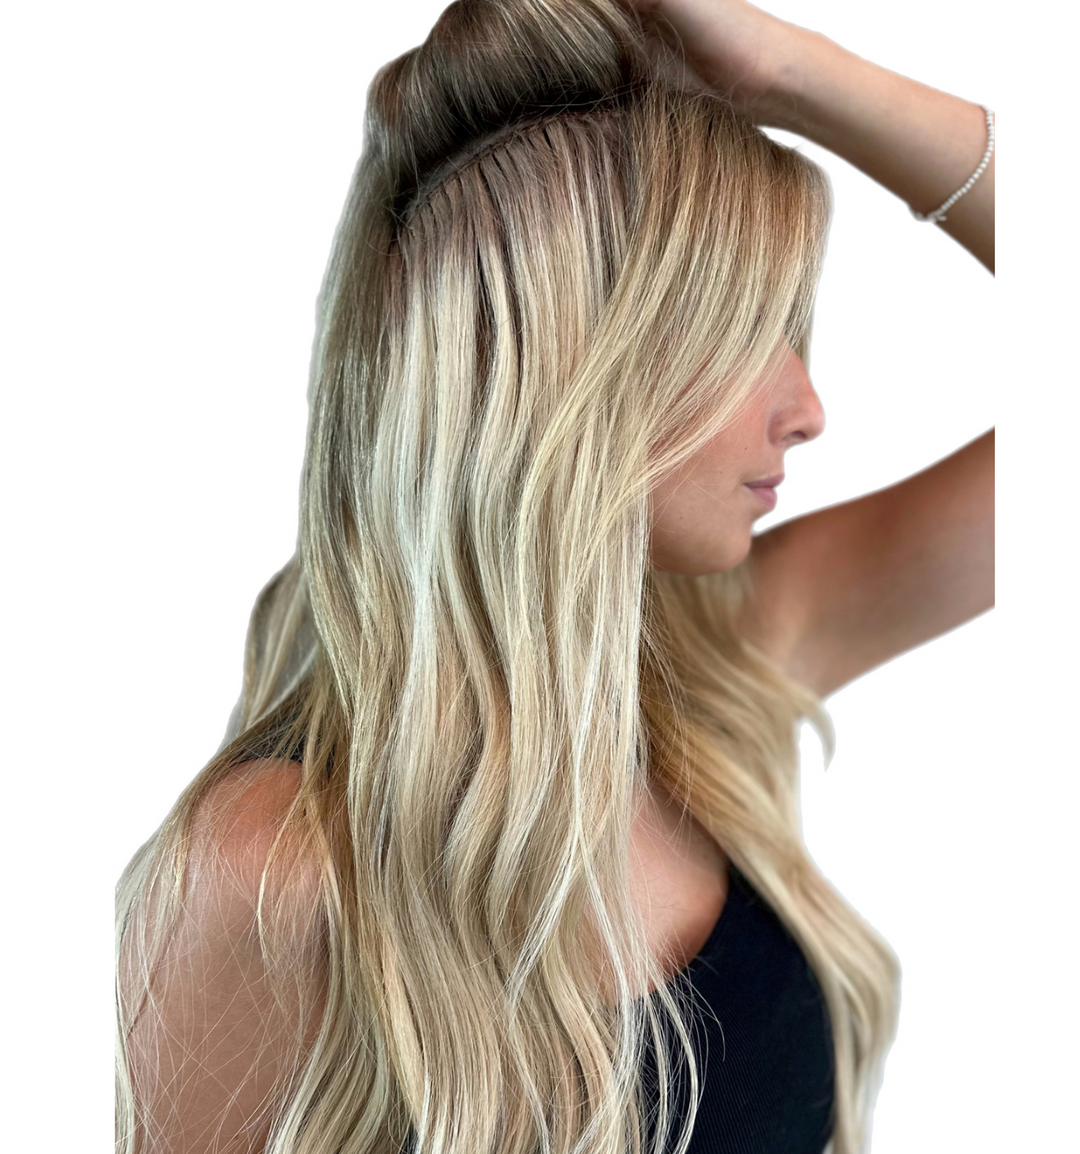 Are Hair Extensions Expensive? The Truth Behind the Cost and Quality